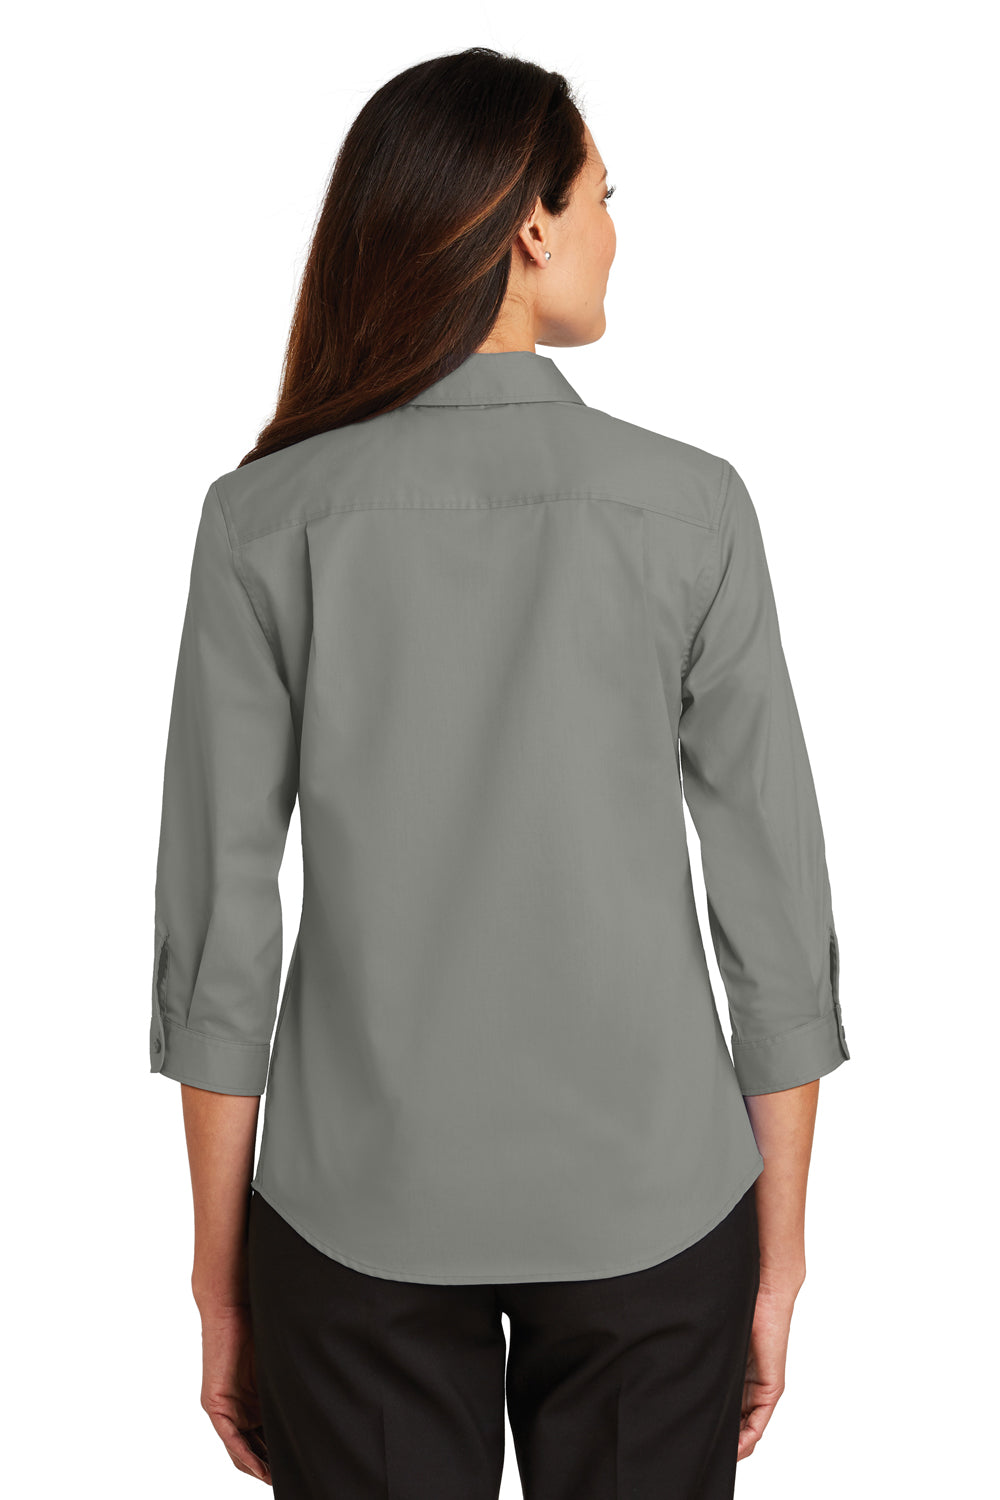 Port Authority L665 Womens SuperPro Wrinkle Resistant 3/4 Sleeve Button Down Shirt Monument Grey Back